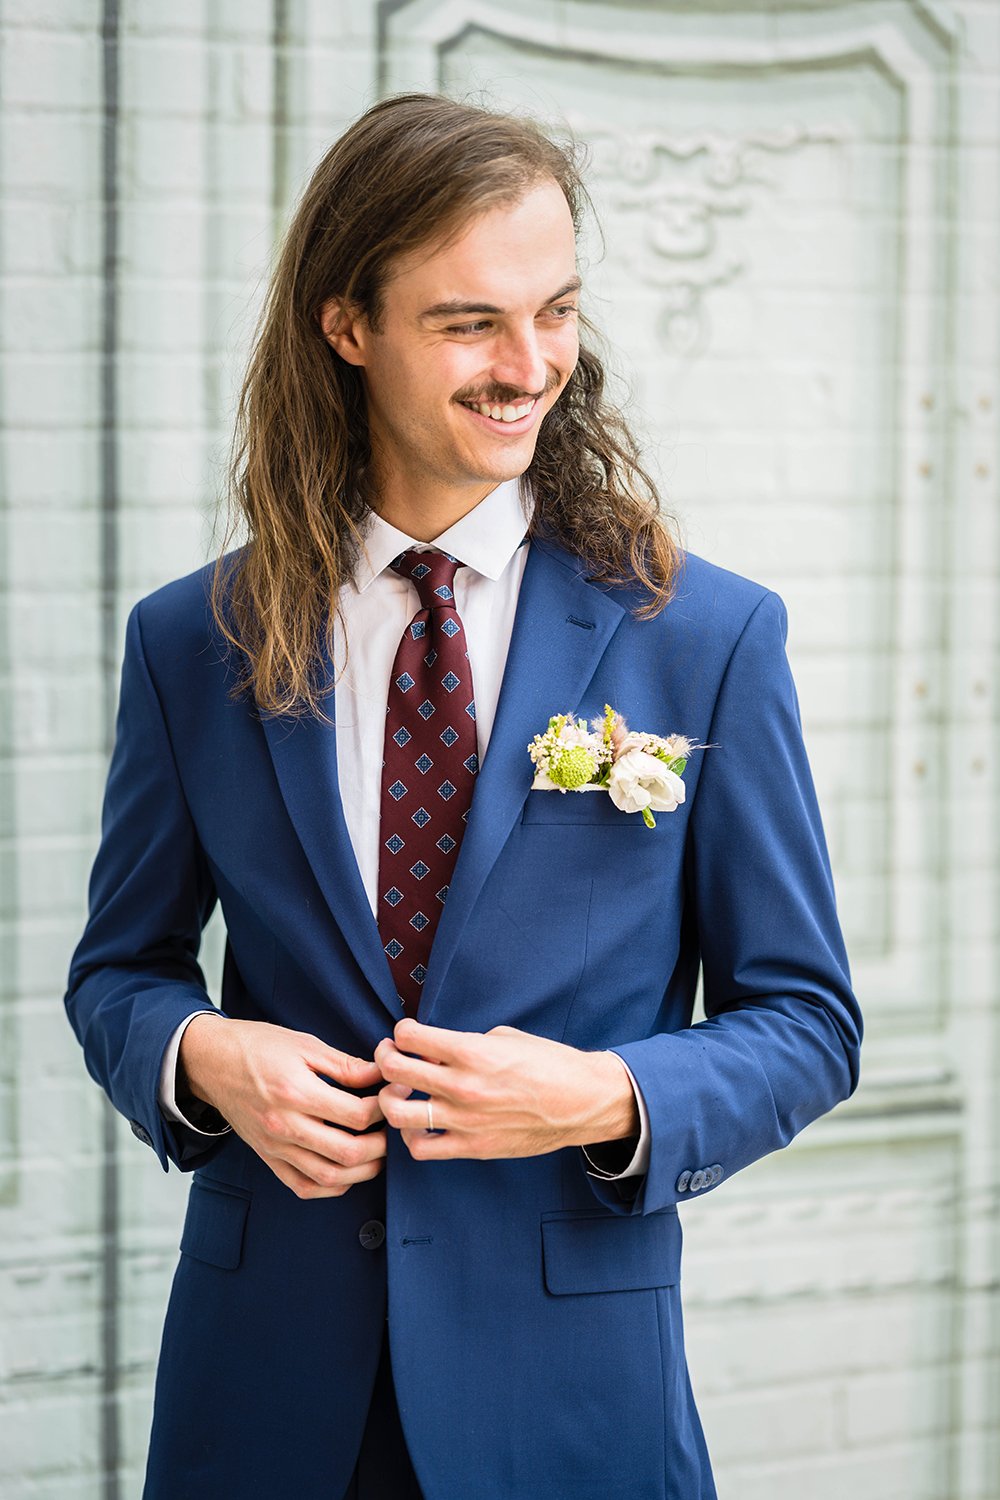 A marrier buttons his suit jacket as he looks off camera and smiles near the Fire Station One Hotel in Roanoke, Virginia.